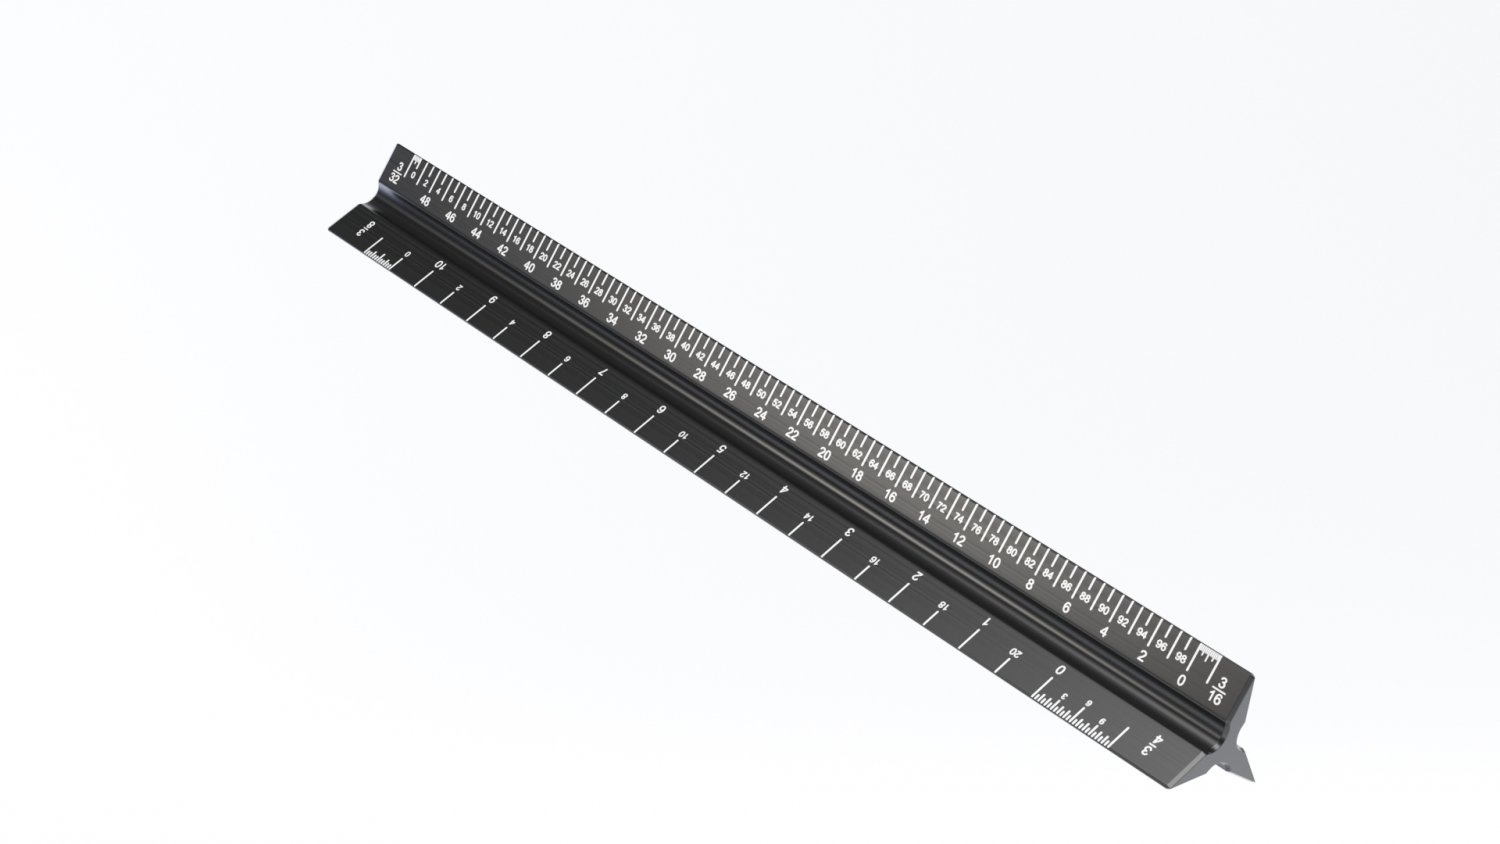 12,902 Architectural Scale Ruler Images, Stock Photos, 3D objects